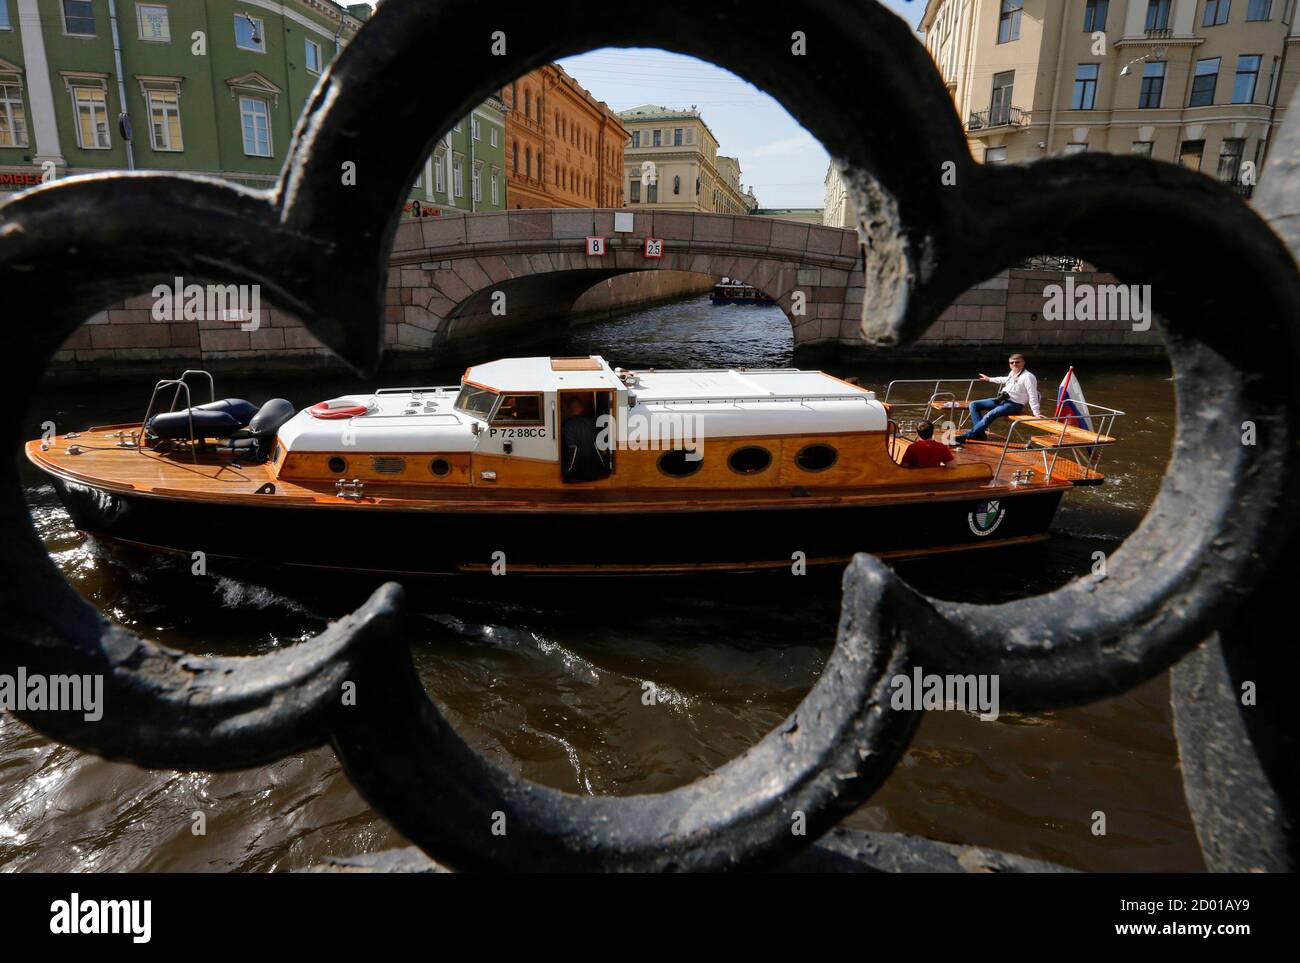 Passengers enjoy a boat ride on a canal in St. Petersburg June 5, 2014. St. Petersburg is famous as a tourist destination for its canals and pre-revolutionary architecture. REUTERS/Alexander Demianchuk (RUSSIA - Tags: TRAVEL SOCIETY) Stock Photo